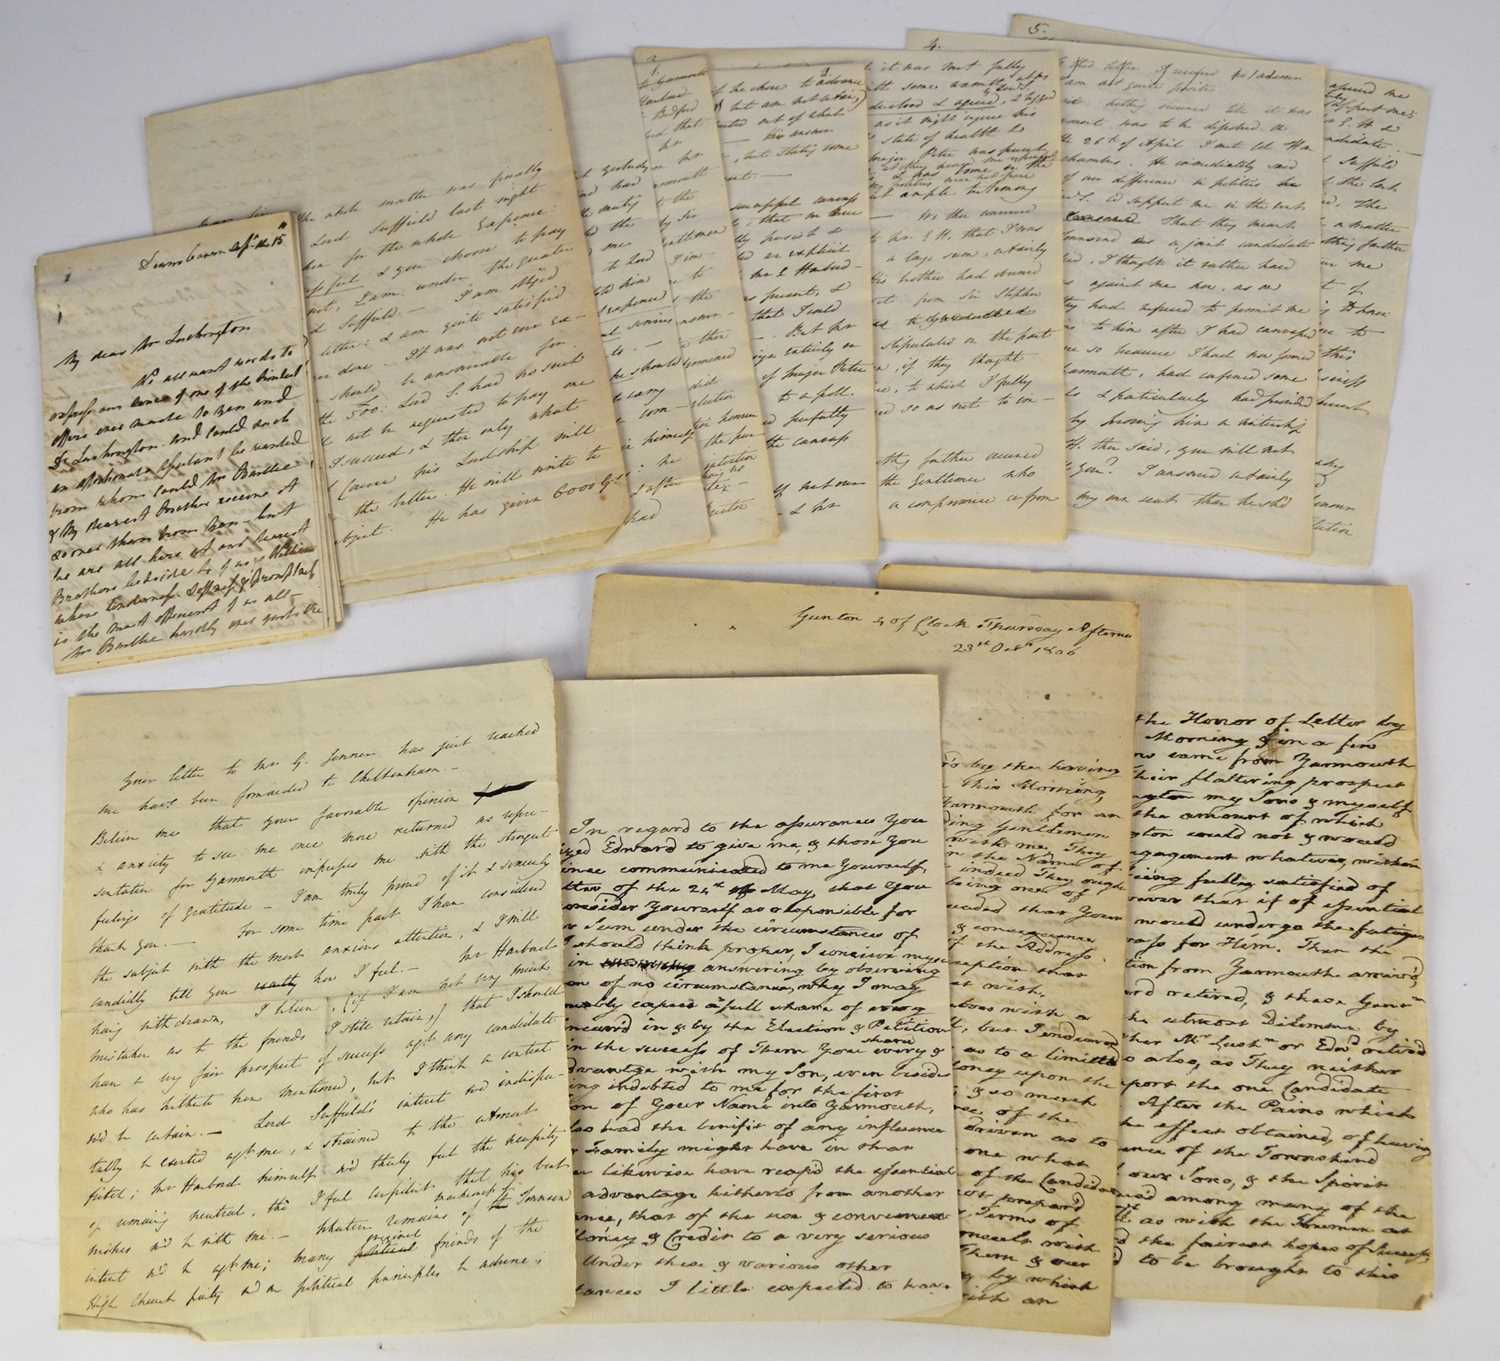 Lot 63 - SUFFIELD, Lord, and others, autograph letters signed to Sir Stephen Lushington. A small quantity of letters written in October 1806 and June 1807 concerning...